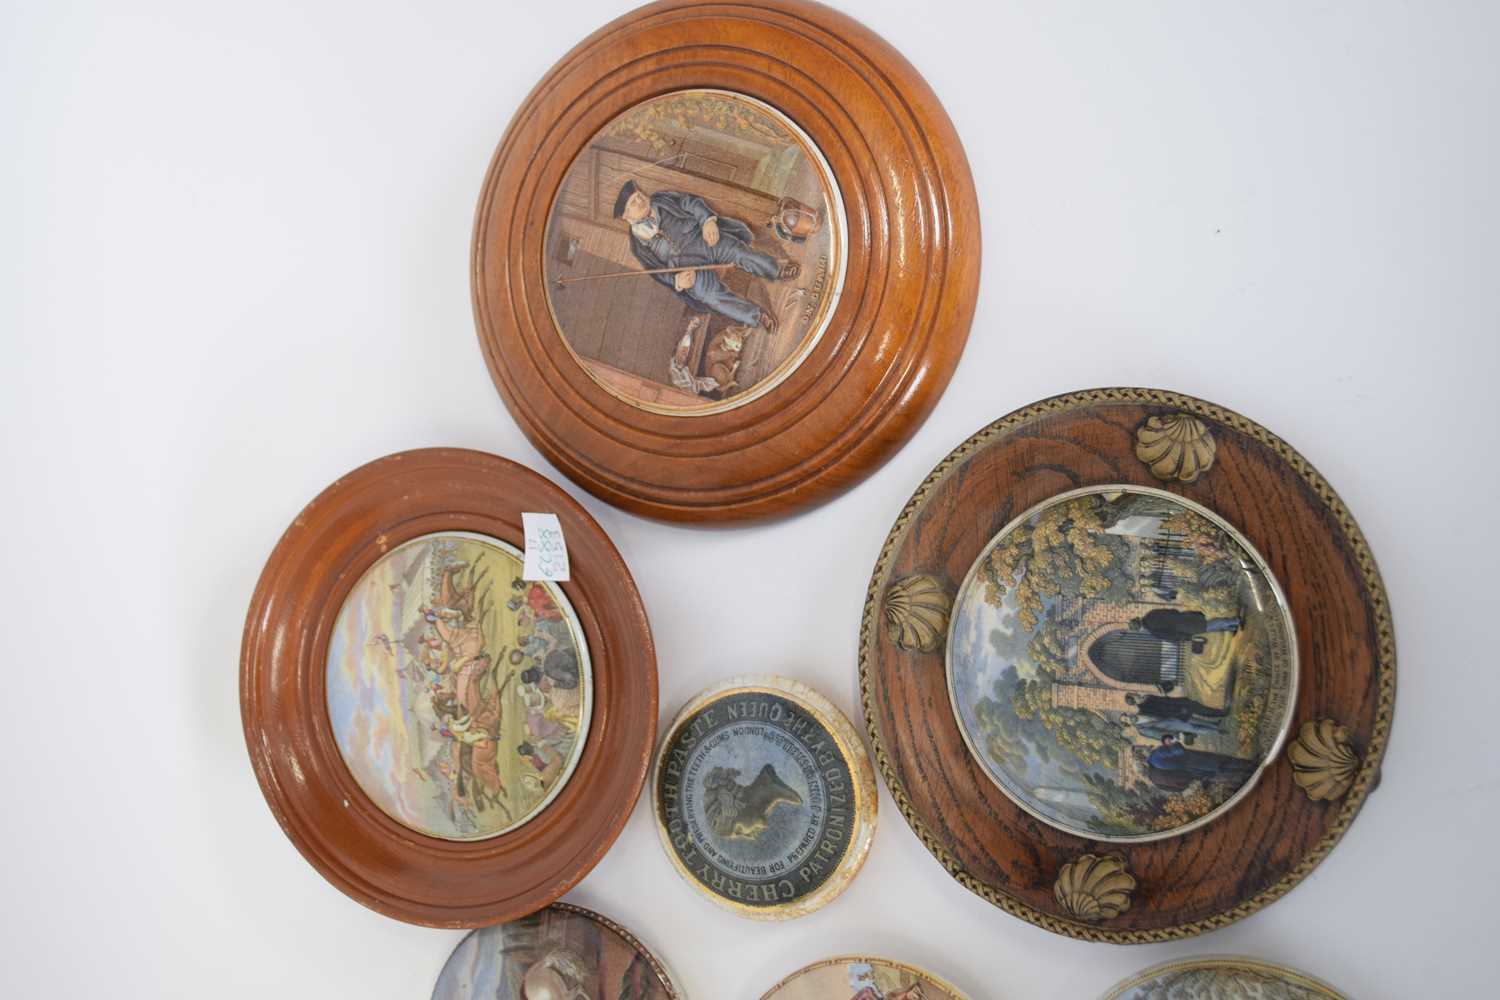 Collection of pot lids, some with wooden mounts including 'On guard', horse racing scene, HRH Prince - Image 3 of 4